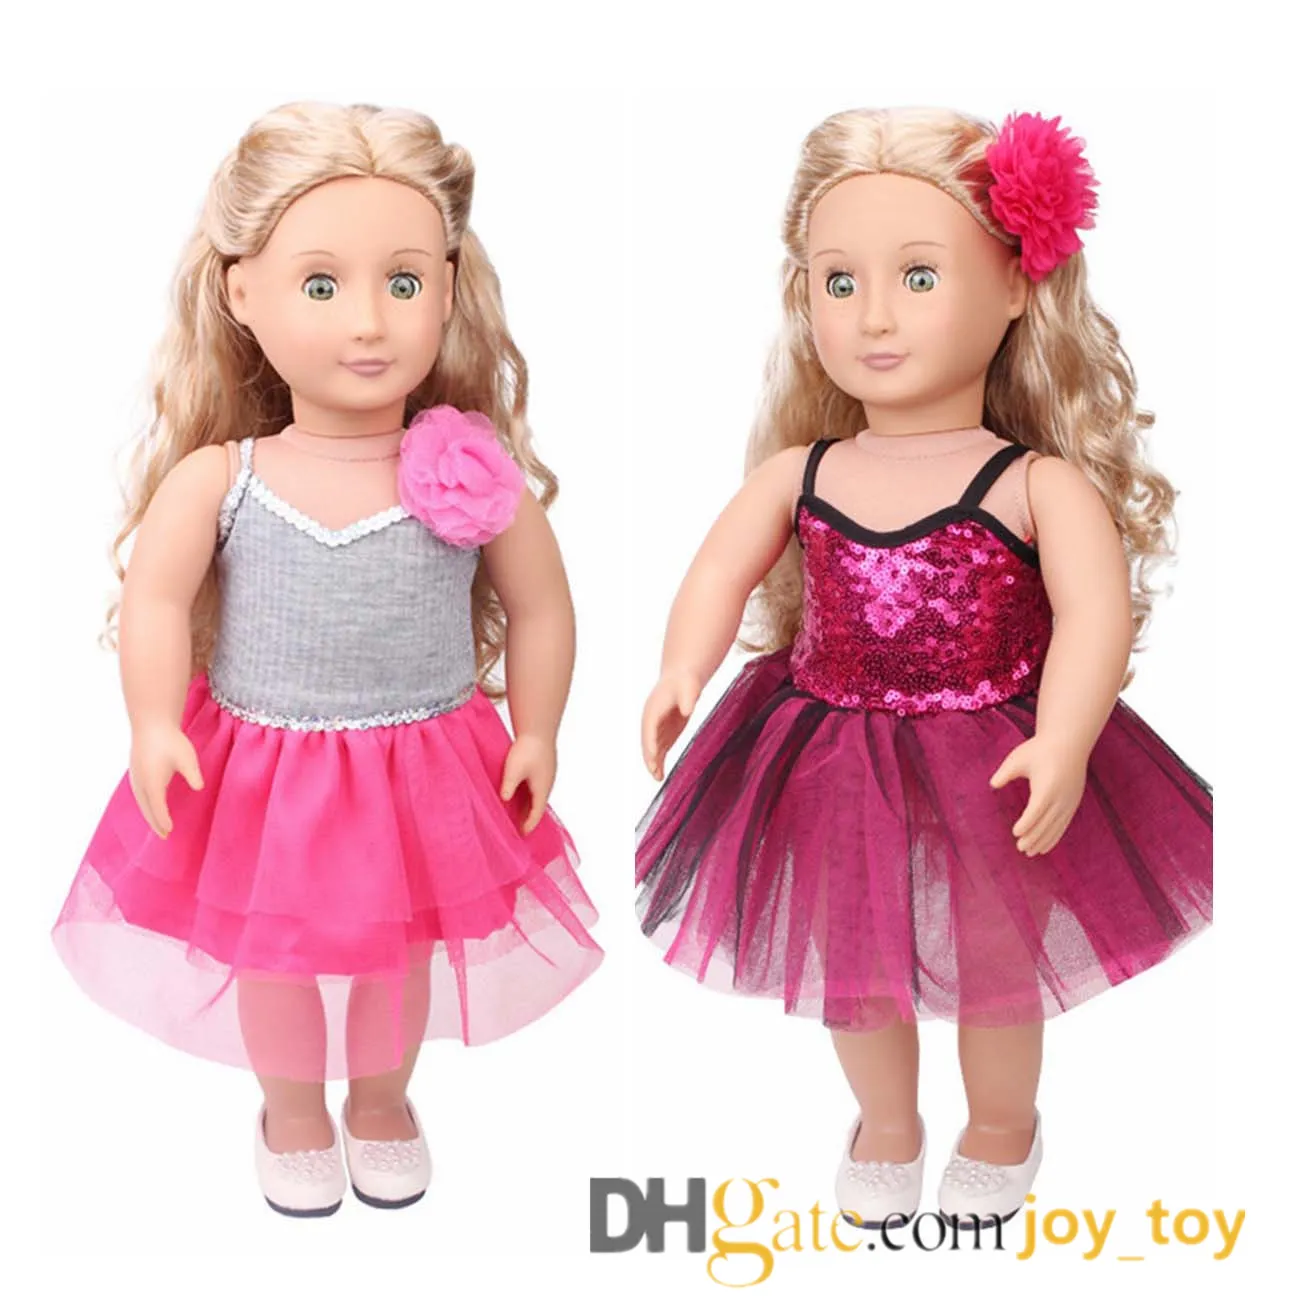 18 inch Doll Skirt One piece Dress Dance Ballet Party Cloth with Flower for American Girl Doll